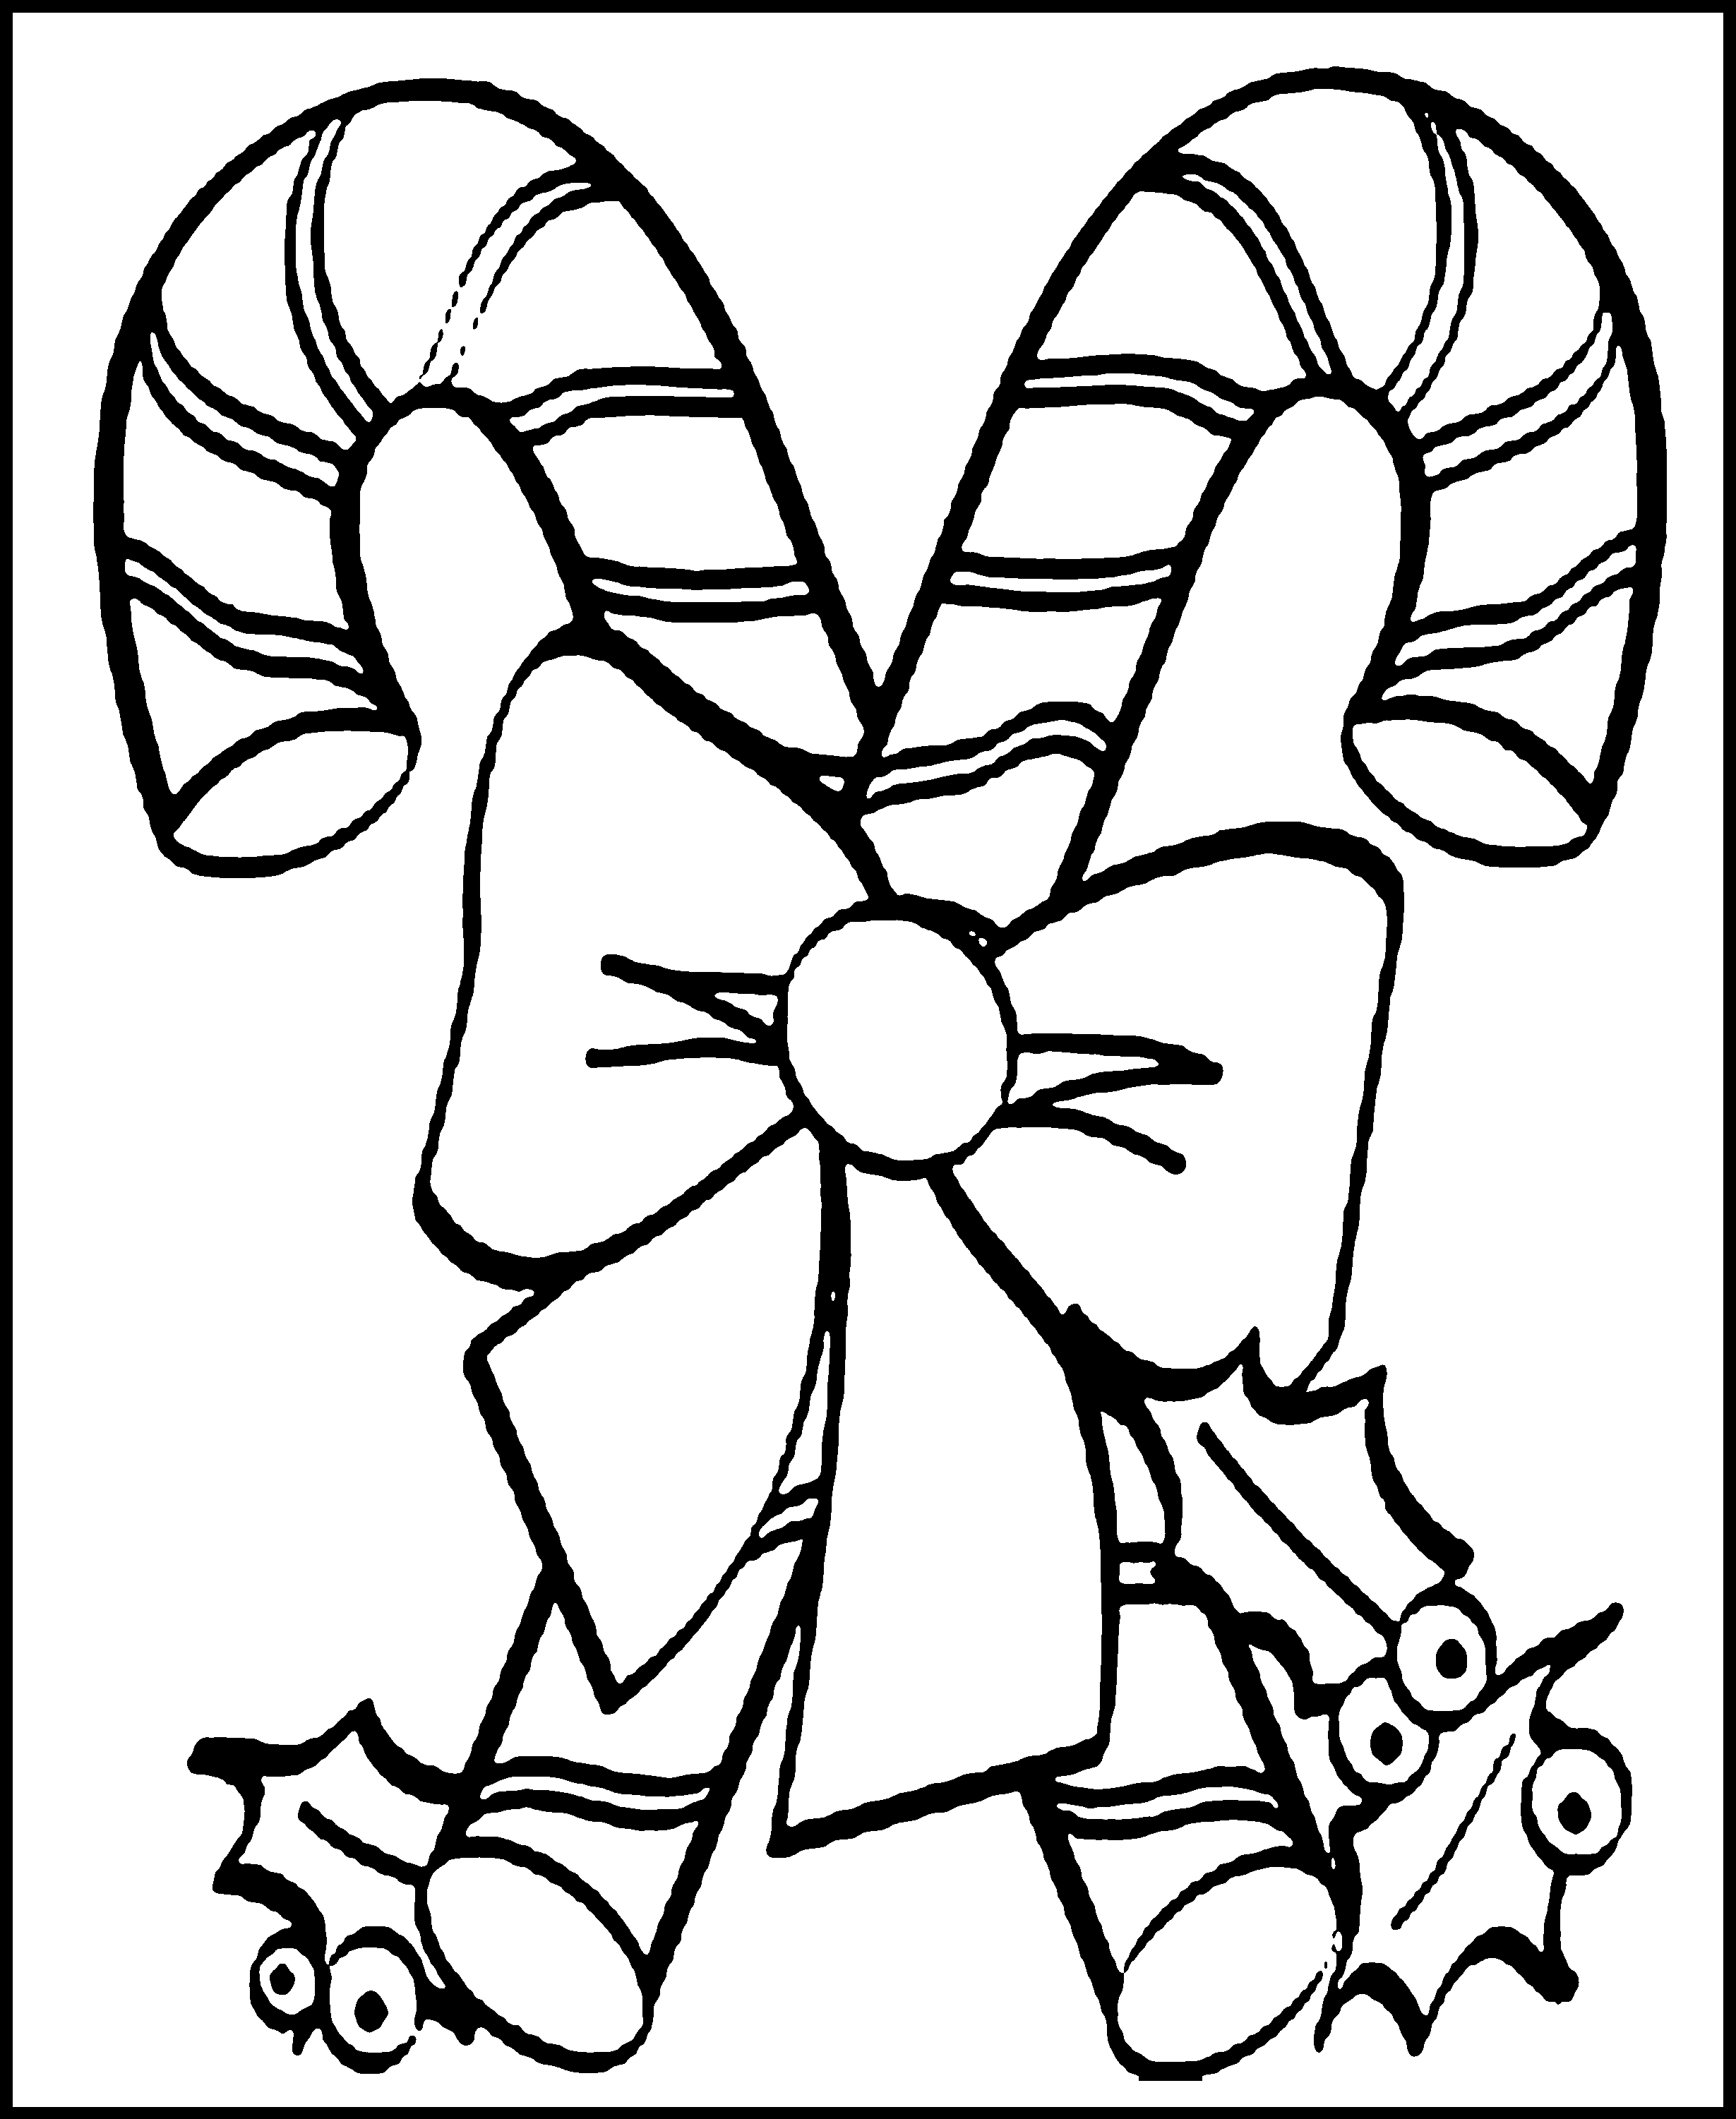 Free Printable Candy Cane Coloring Pages For Kids | Young At Heart - Xmas Coloring Pages Free Printable